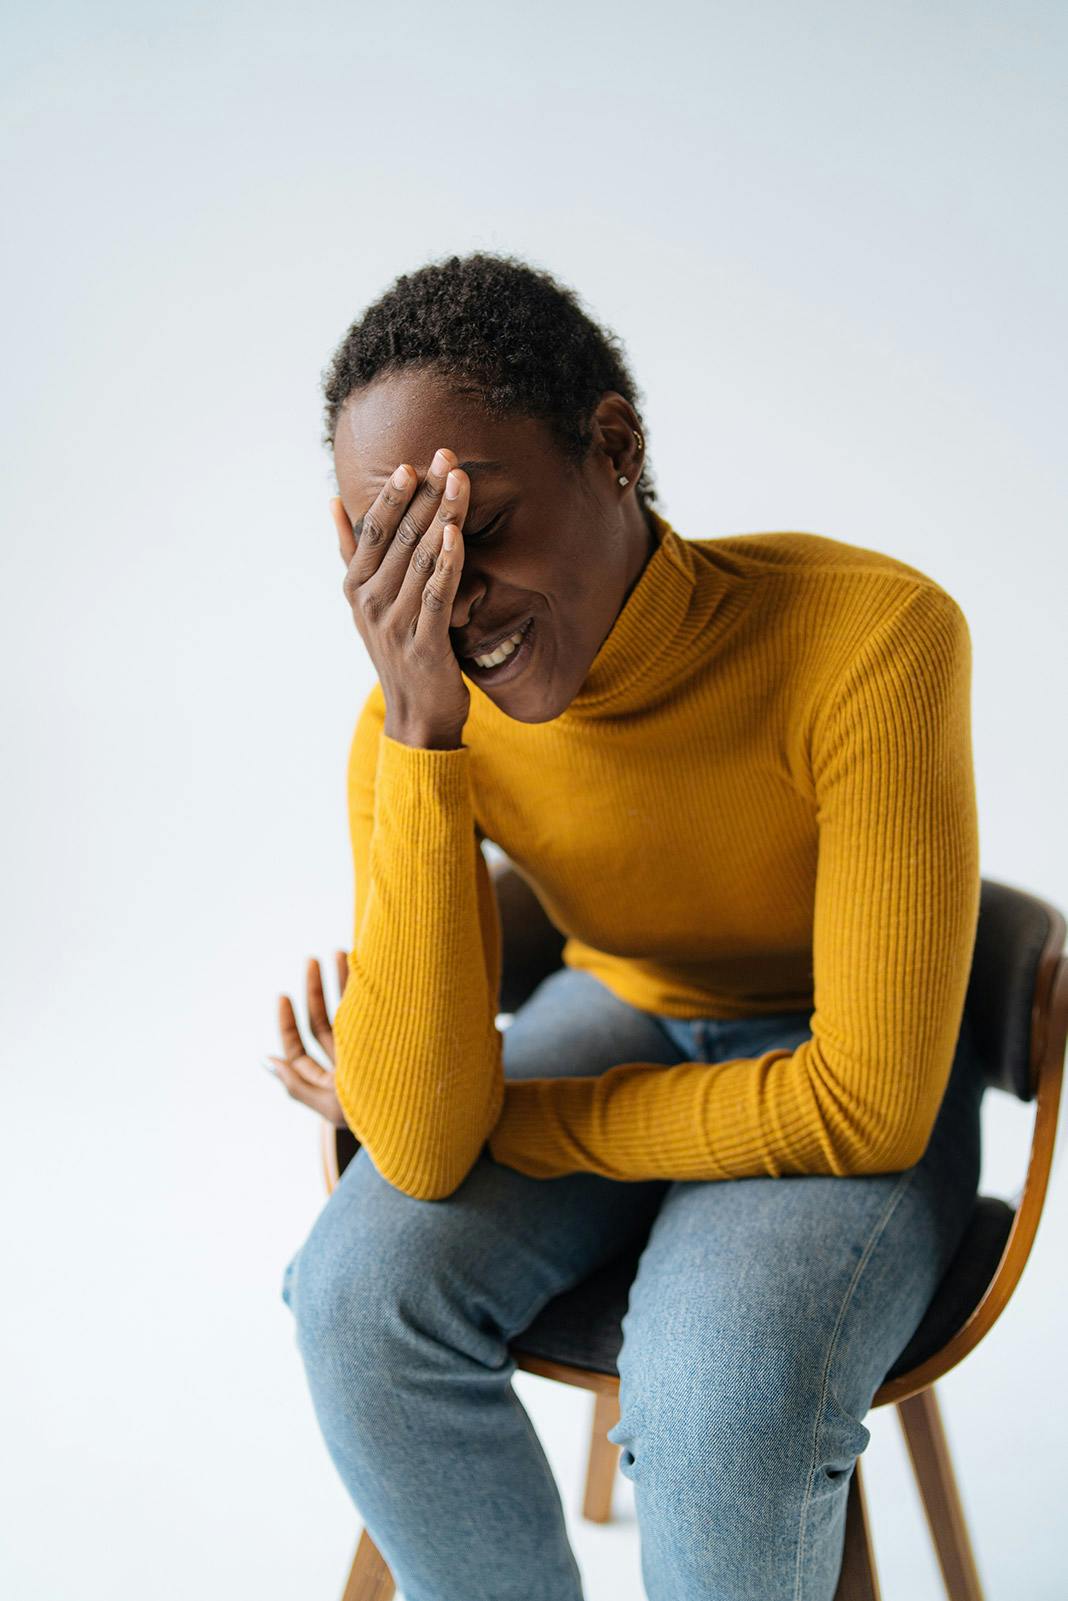 Young african american woman with short curly hair puts hand over her head and eyes, experiencing a migraine, sitting in a chair on a white background in the studio. Woman wearing a bright yellow turtleneck and blue jeans